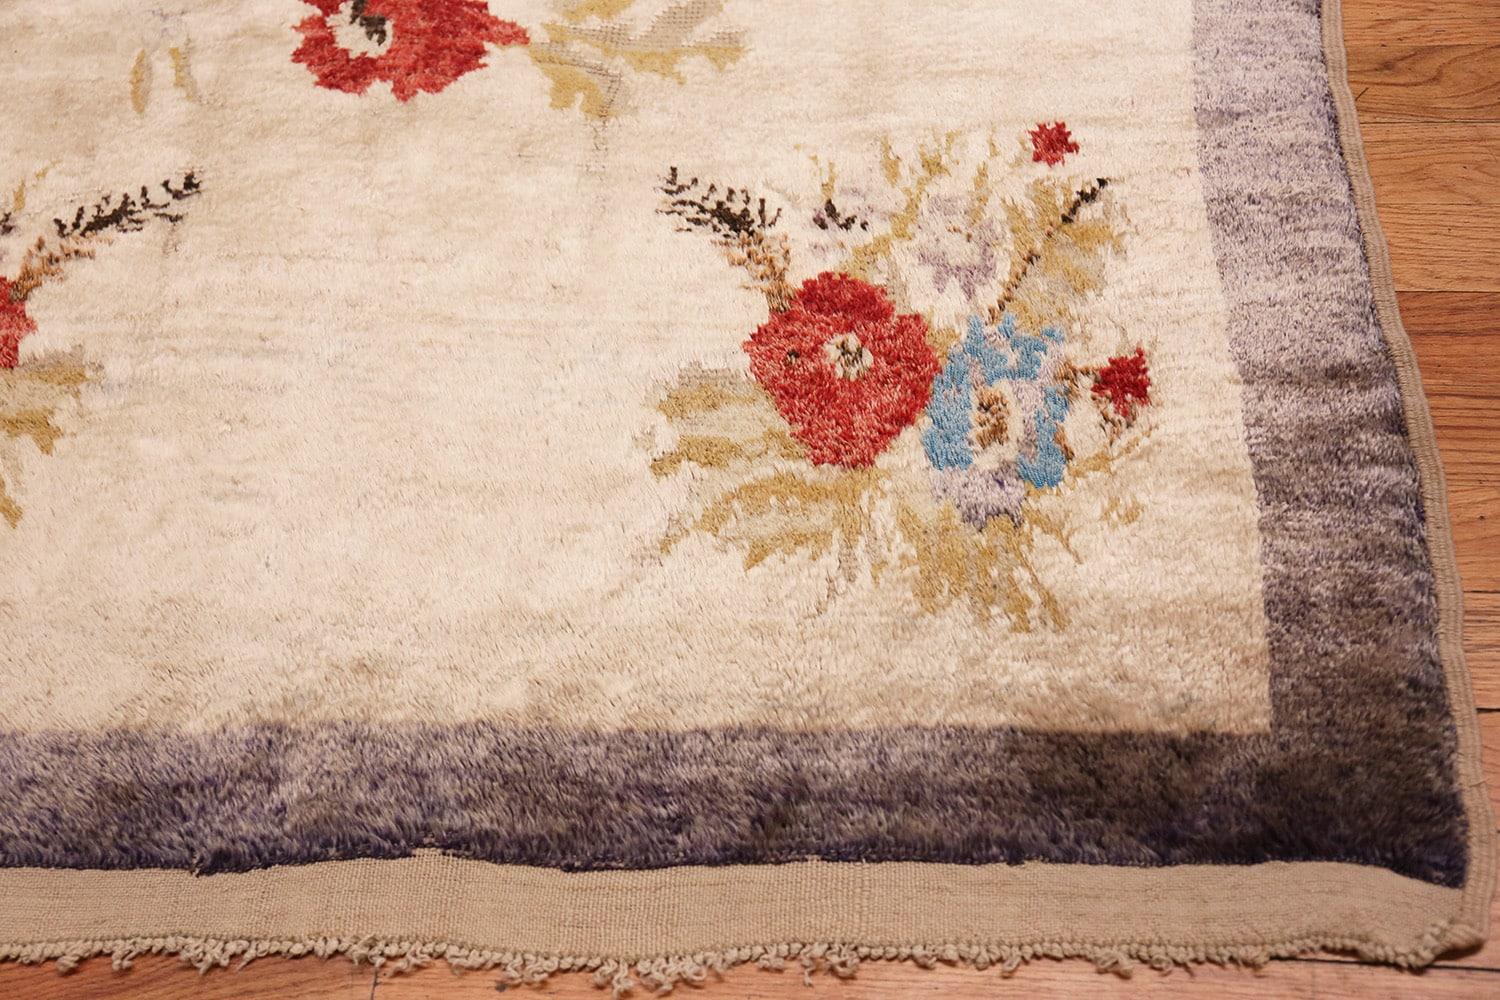 Vintage Turkish Sivas rug, country of origin / rug type: Turkish rug, circa mid-20th century. Size: 4 ft 8 in x 6 ft 2 in (1.42 m x 1.88 m)

The white field of this unusual rug displays four large clusters of flowers. The central one utilizes red,